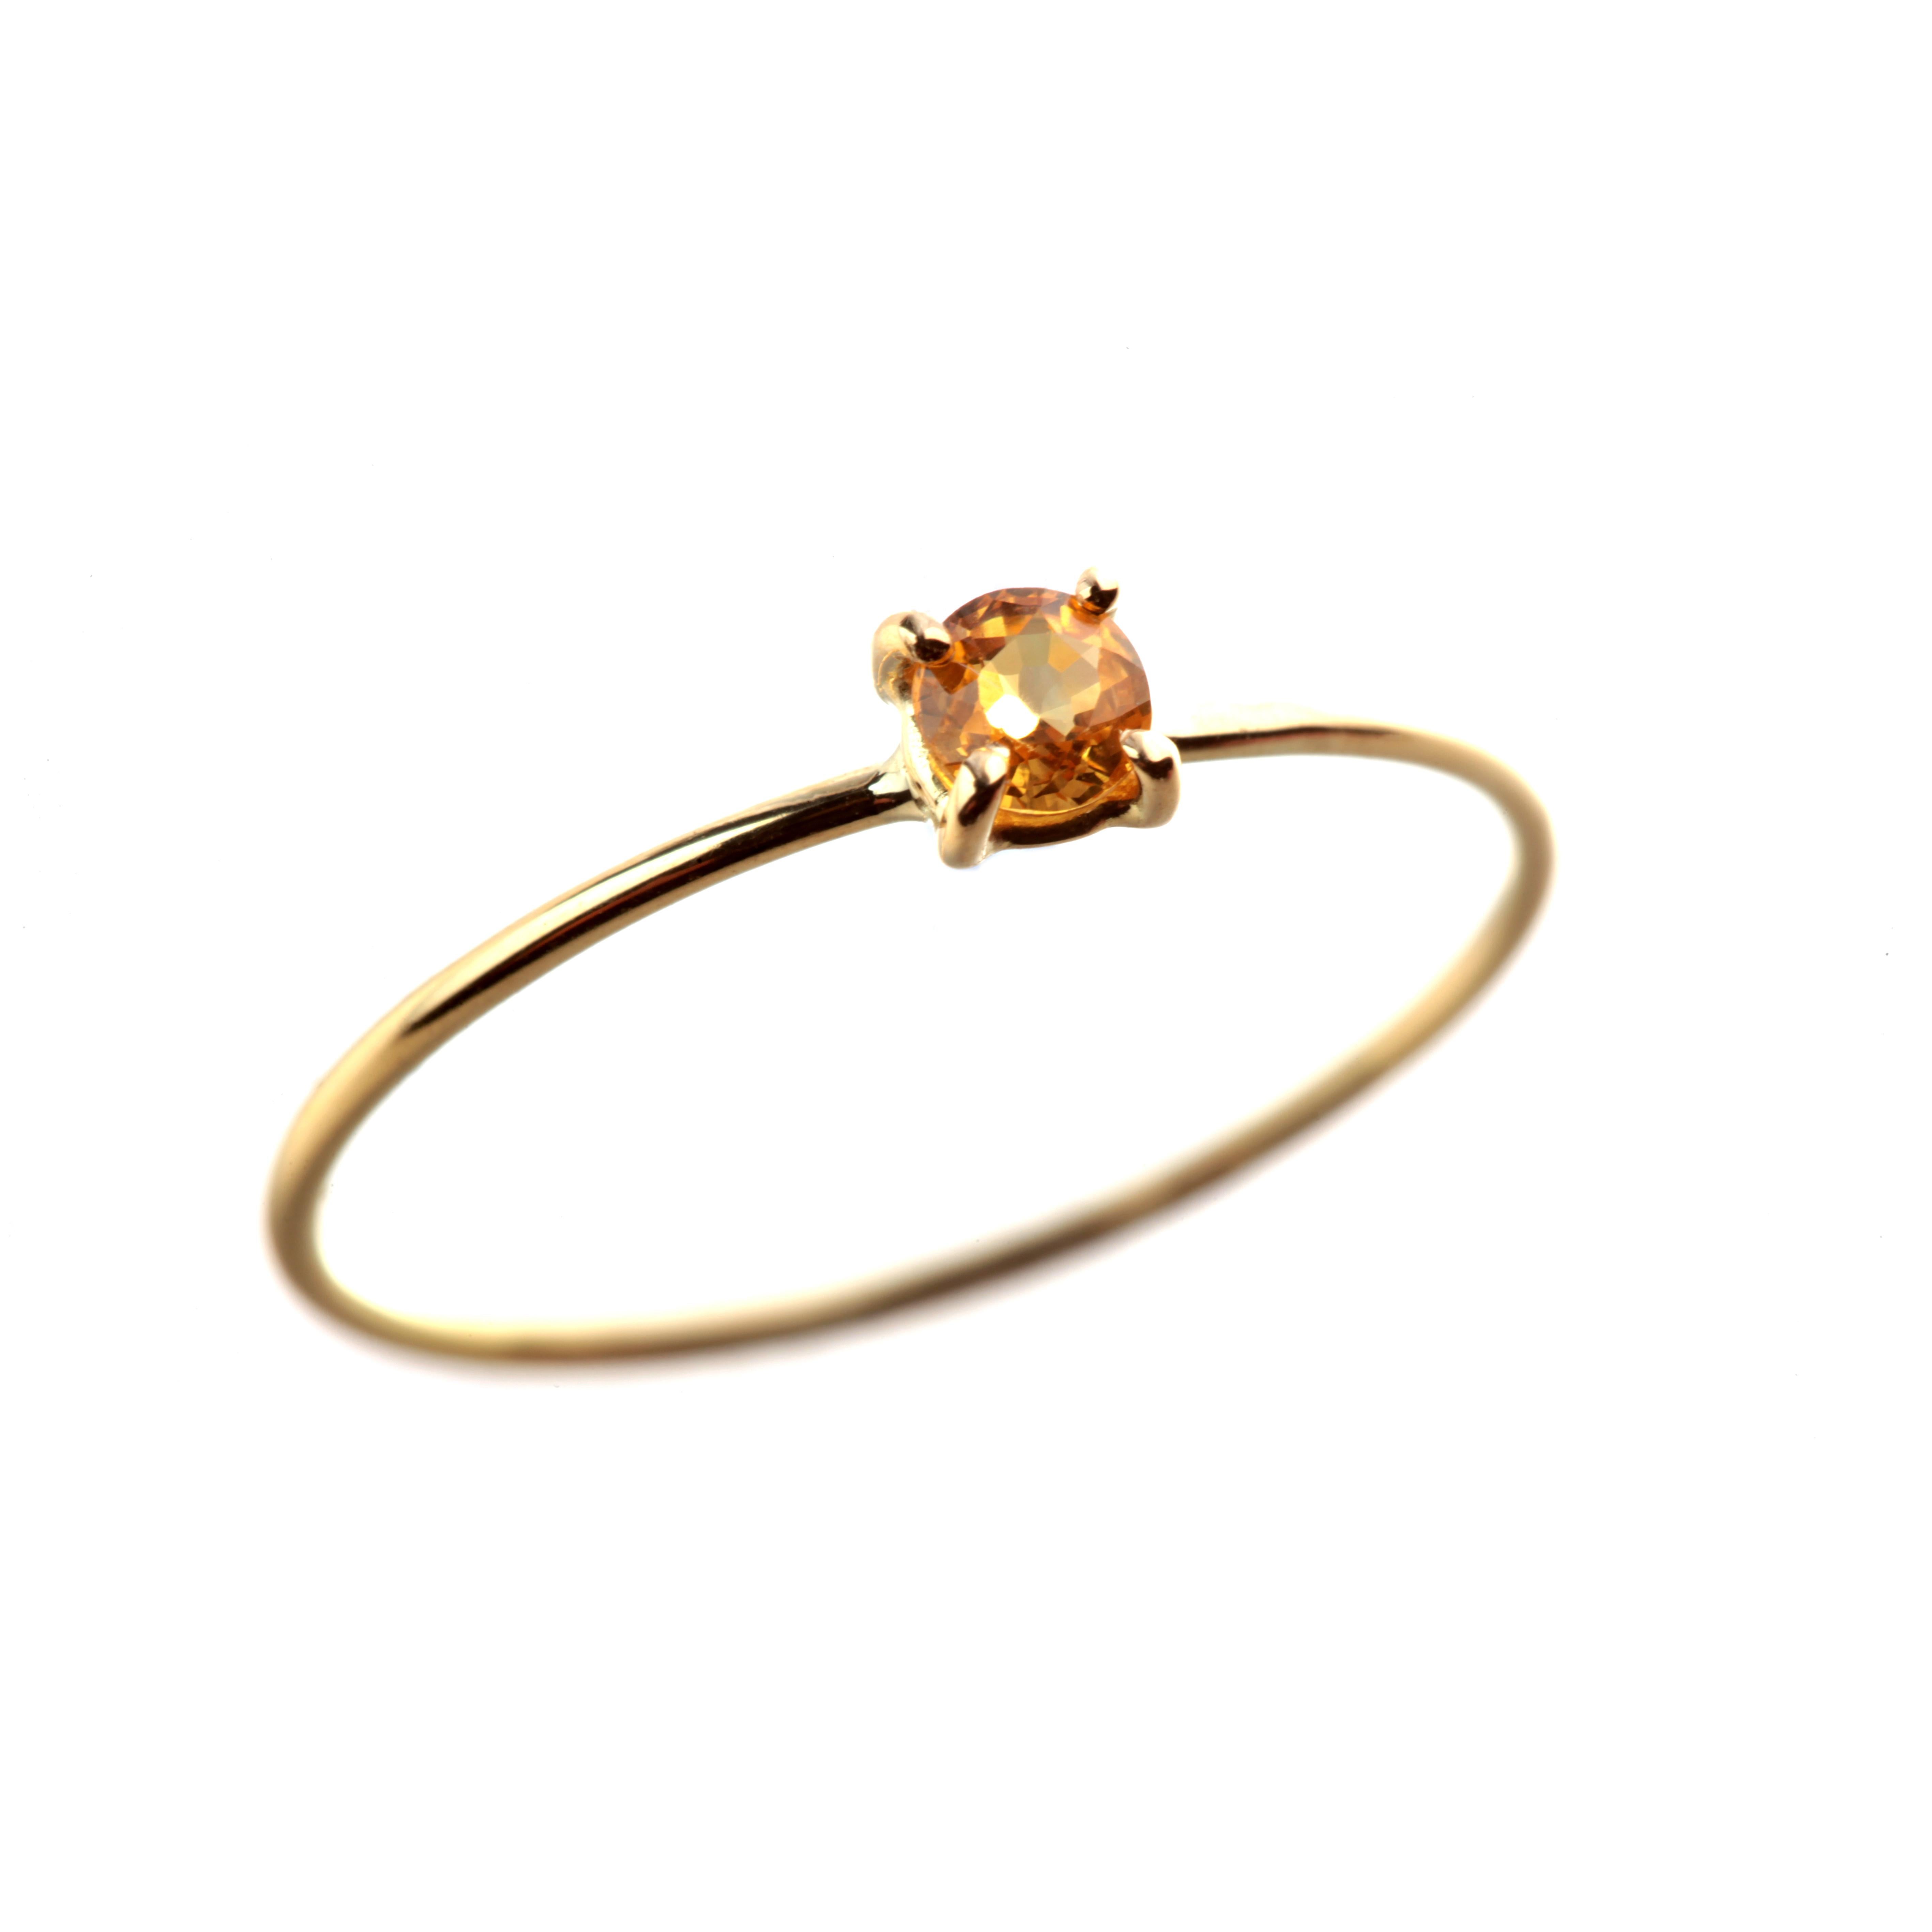 Signature INTINI Jewels yellow sapphire jewellery. Modern and elegant ring design in 18k yellow gold with an brilliant cut with tiny griffes sormounting the ring.

Yellow Sapphire represents divine grace and power. It is considered to be one of the